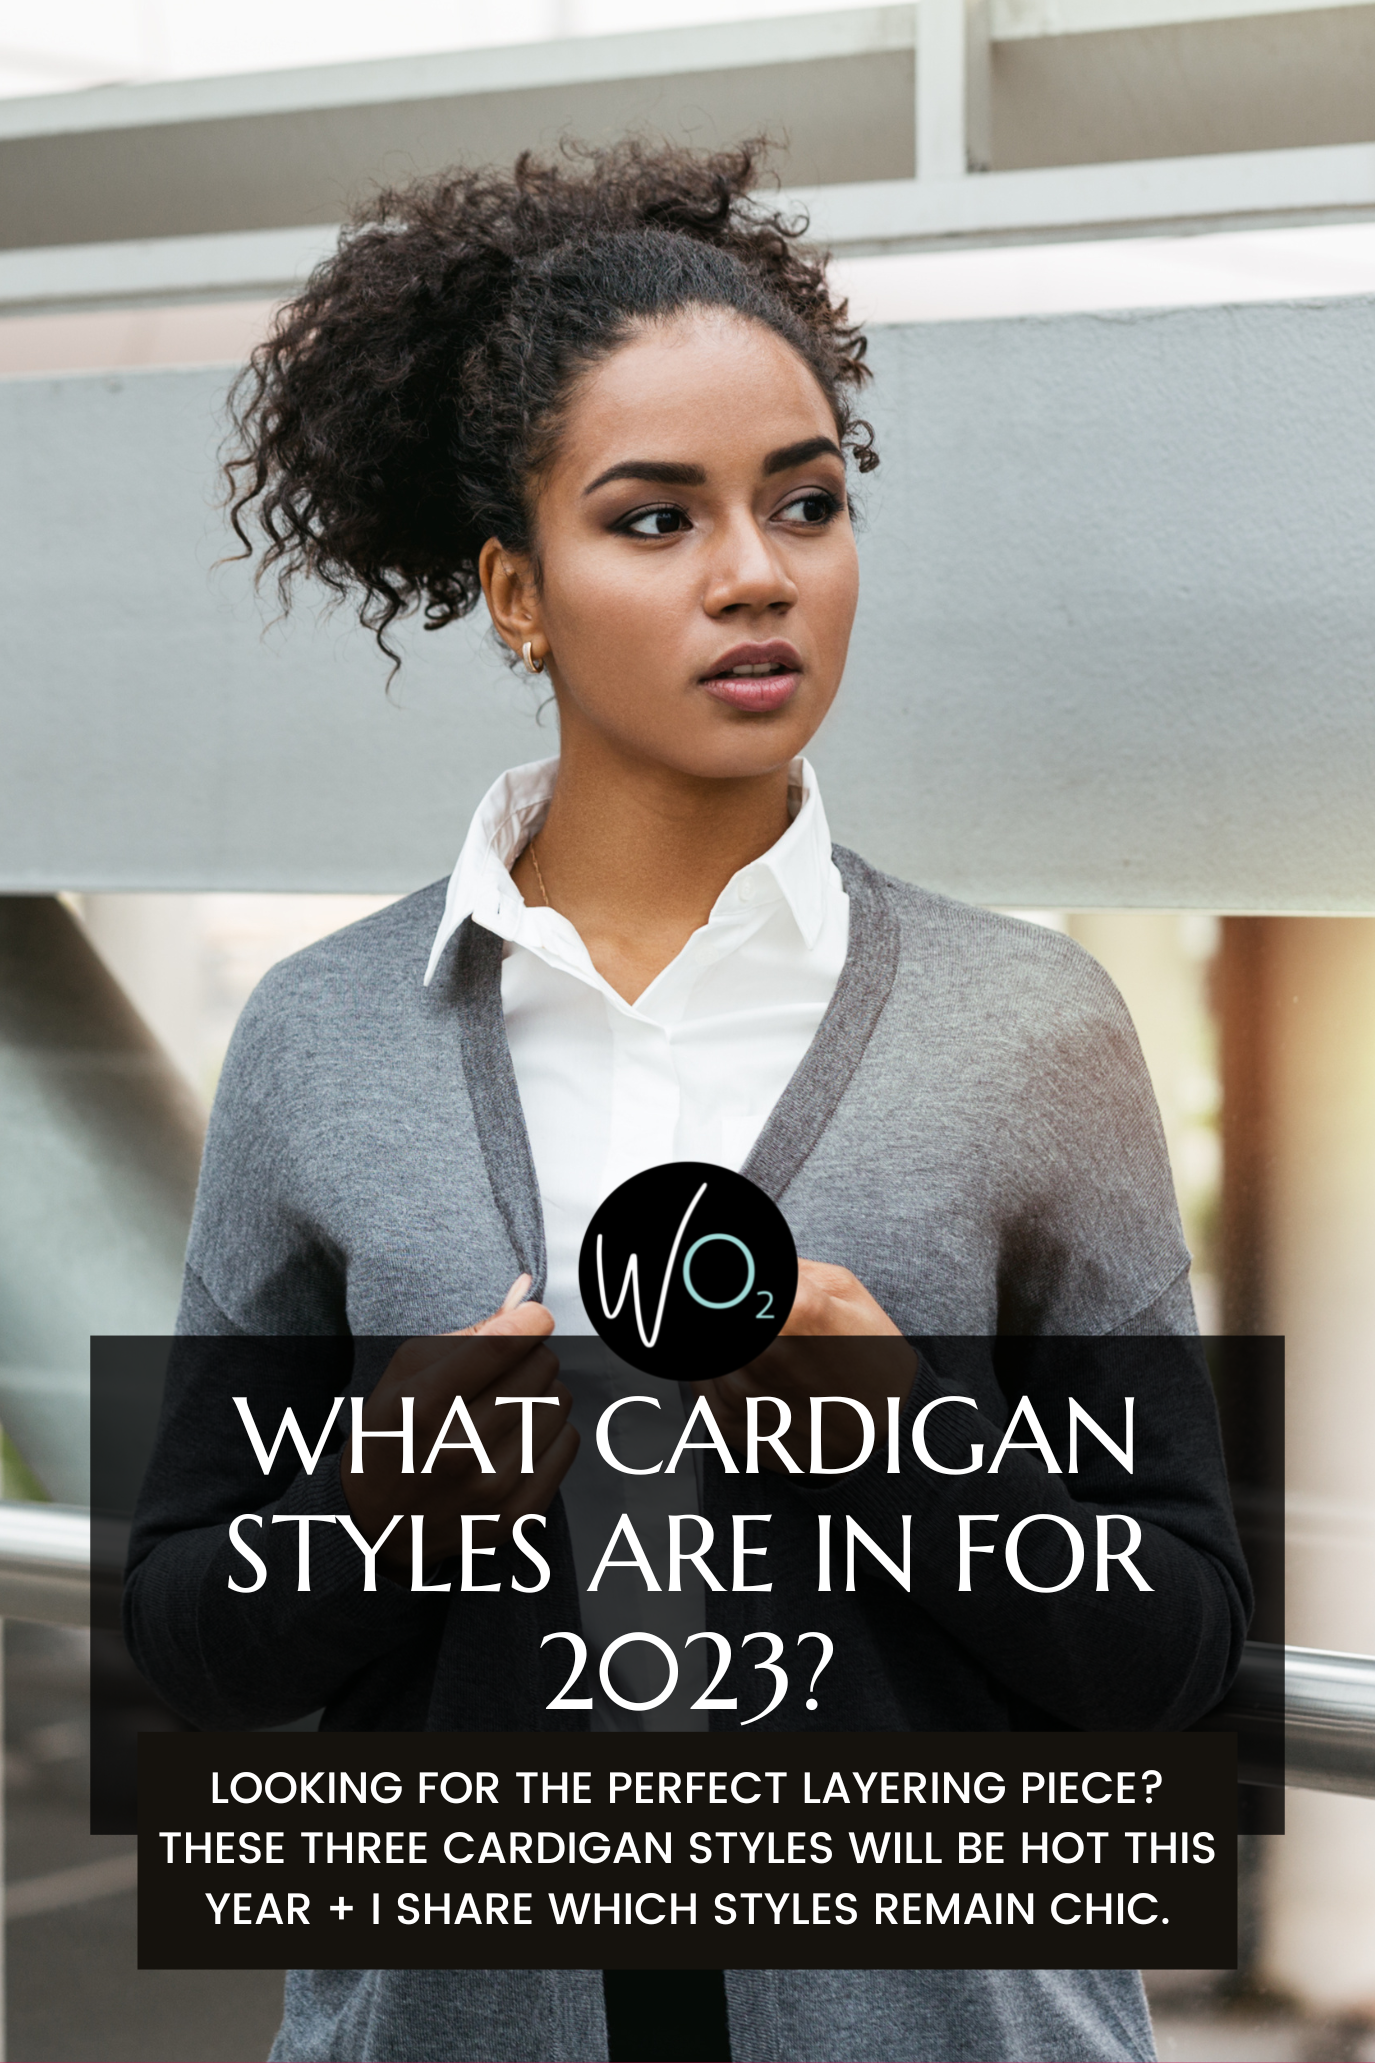 What Cardigans Are In Style For 2023?